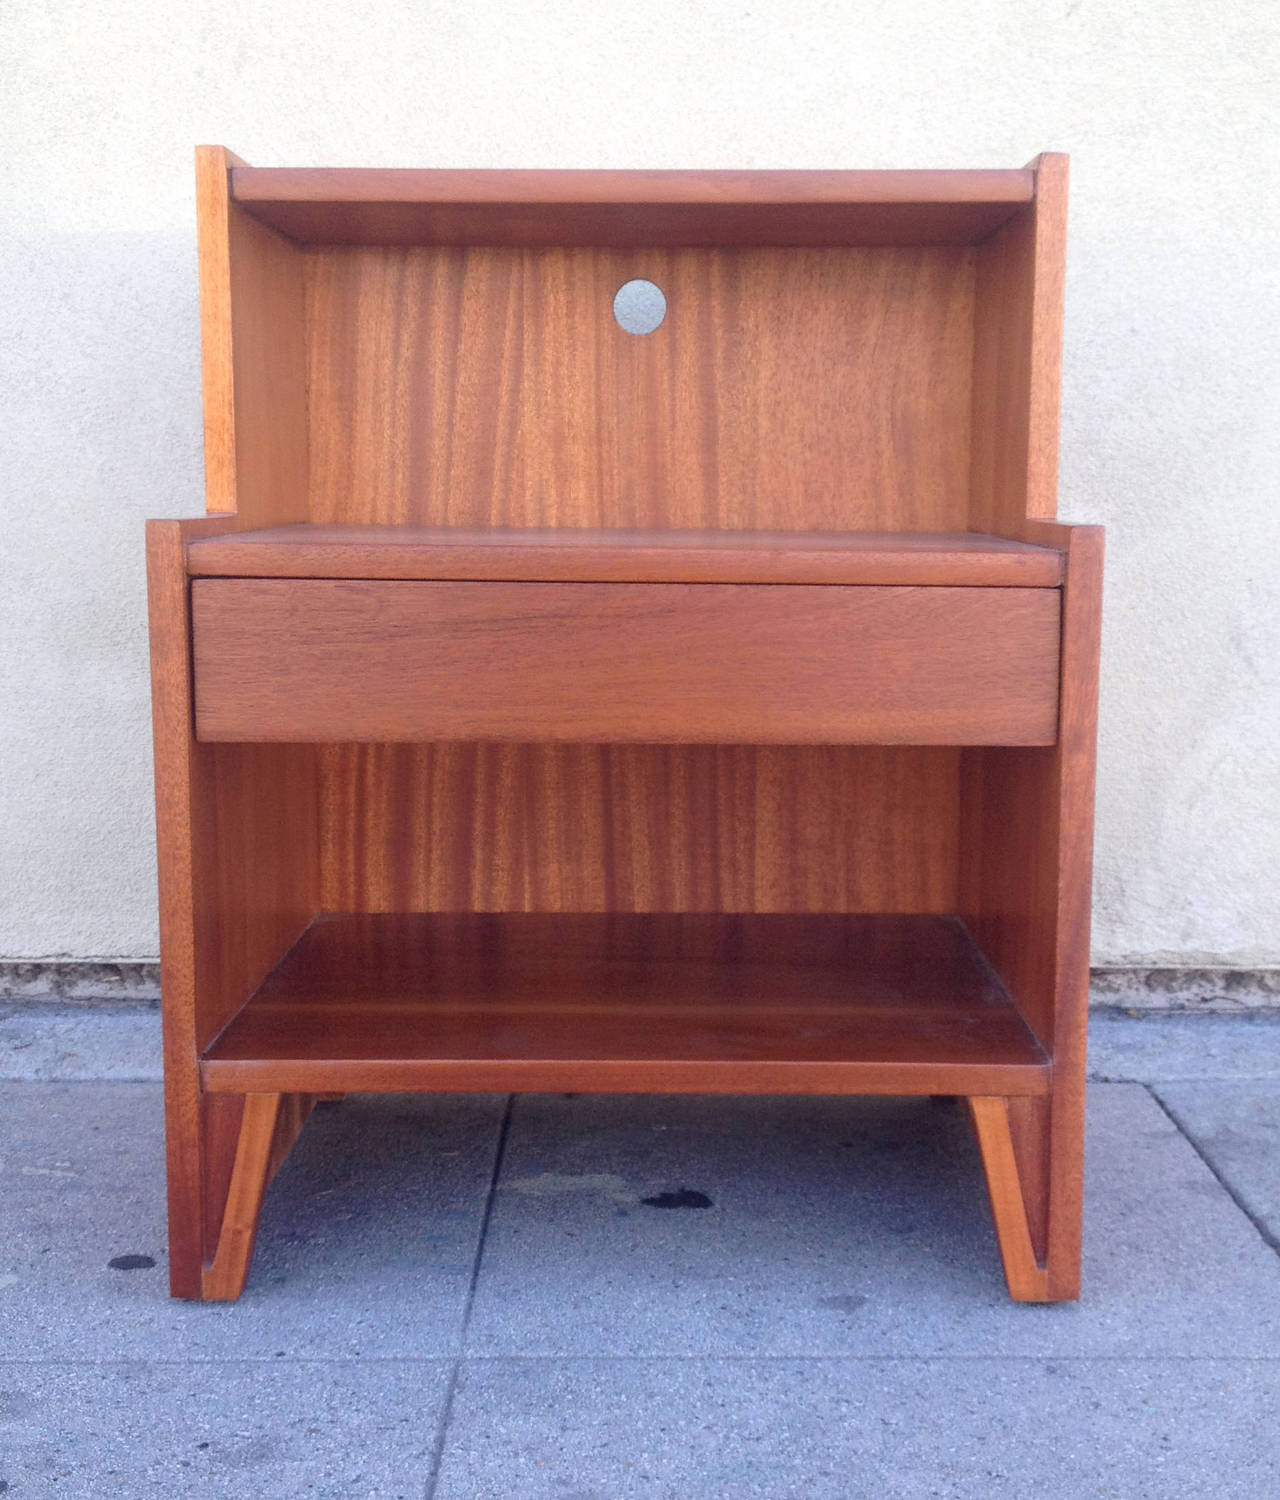 This pair of mid-century modern Landstrom nightstands features an architectural two-tier frame, rendered entirely in rich solid mahogany . The recessed top shelf is supported by a deeper bottom shelf with a single drawer in between. On the back